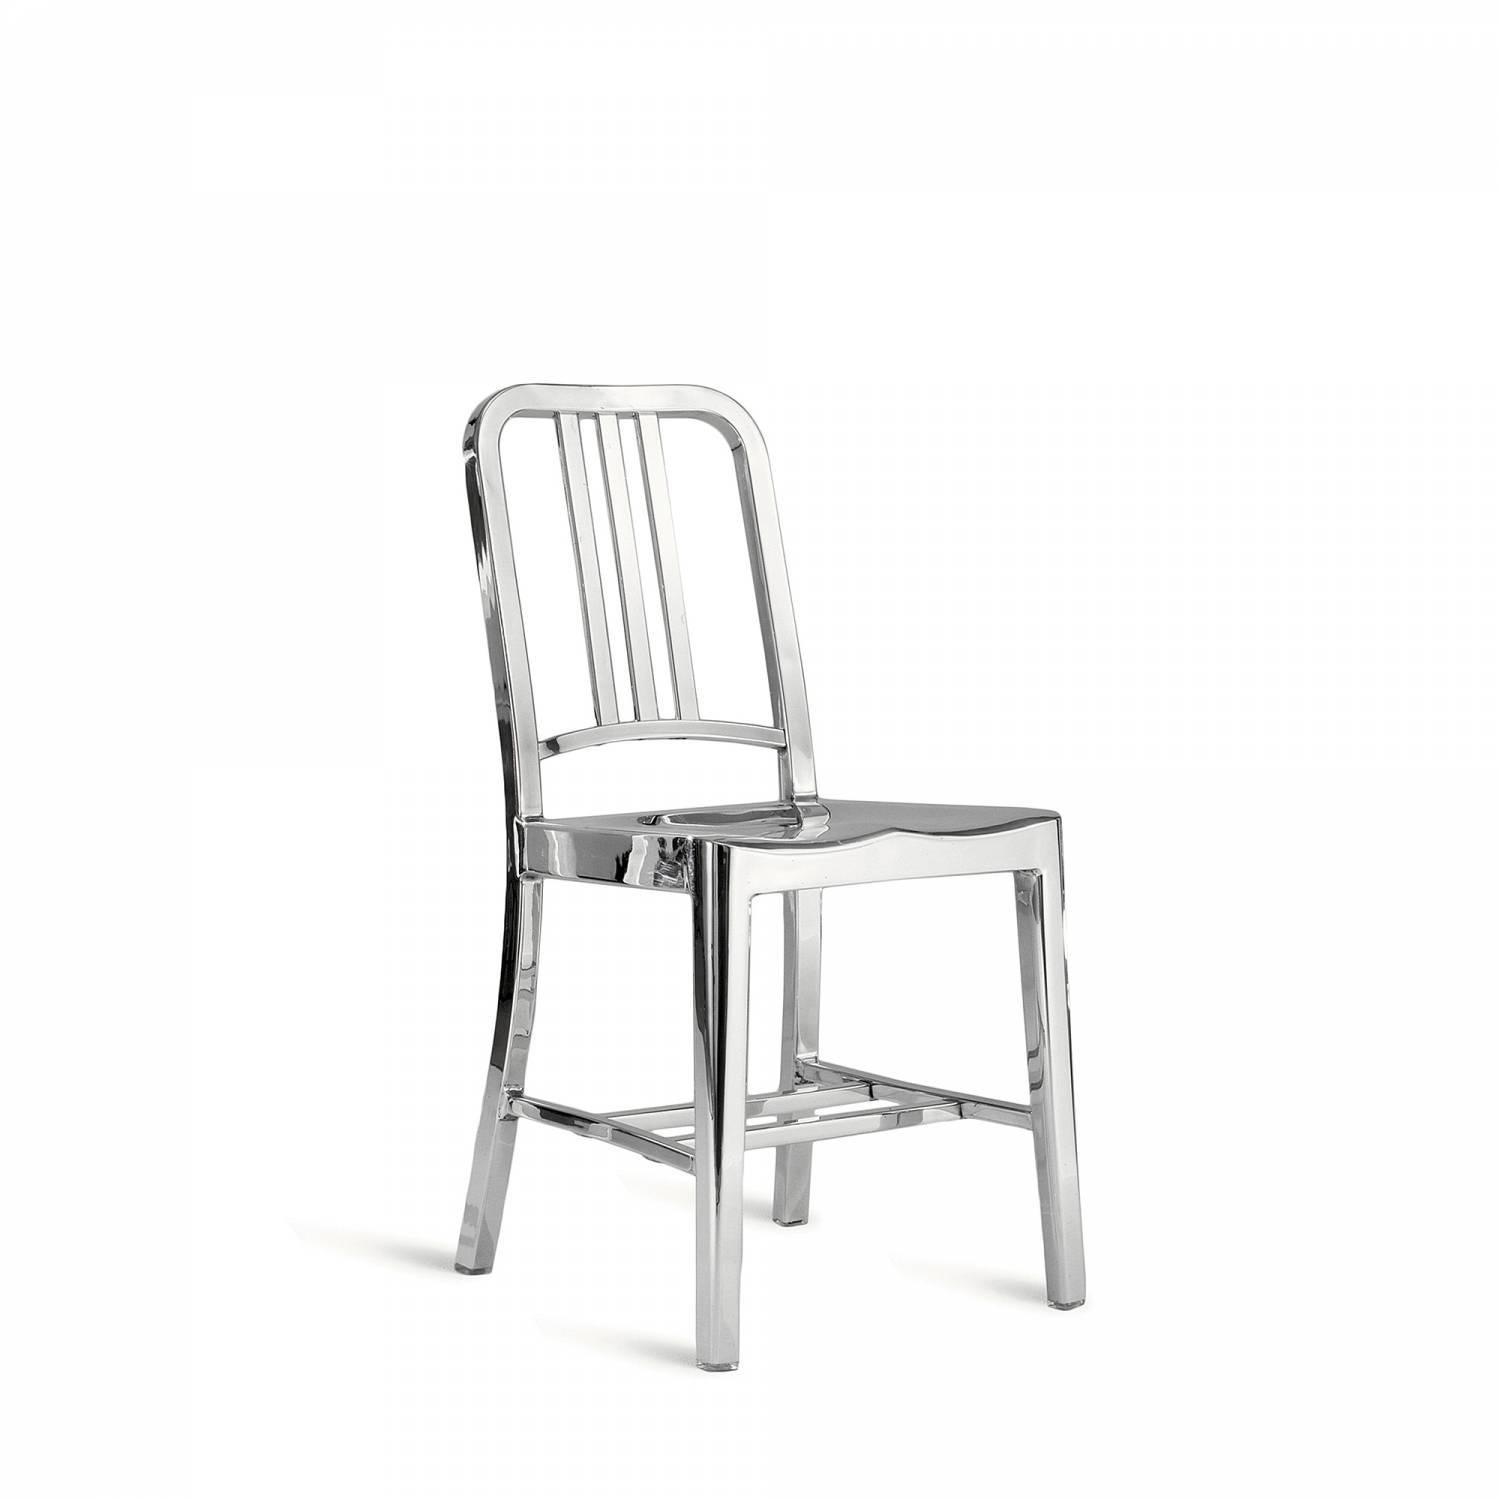 First built for use on submarines in 1944, the Navy Chair has been in continuous Production ever since. With the famous 77 step Process, our craftsmen take soft, recycled aluminum, hand form and weld it- then temper it for strength. Finally, the